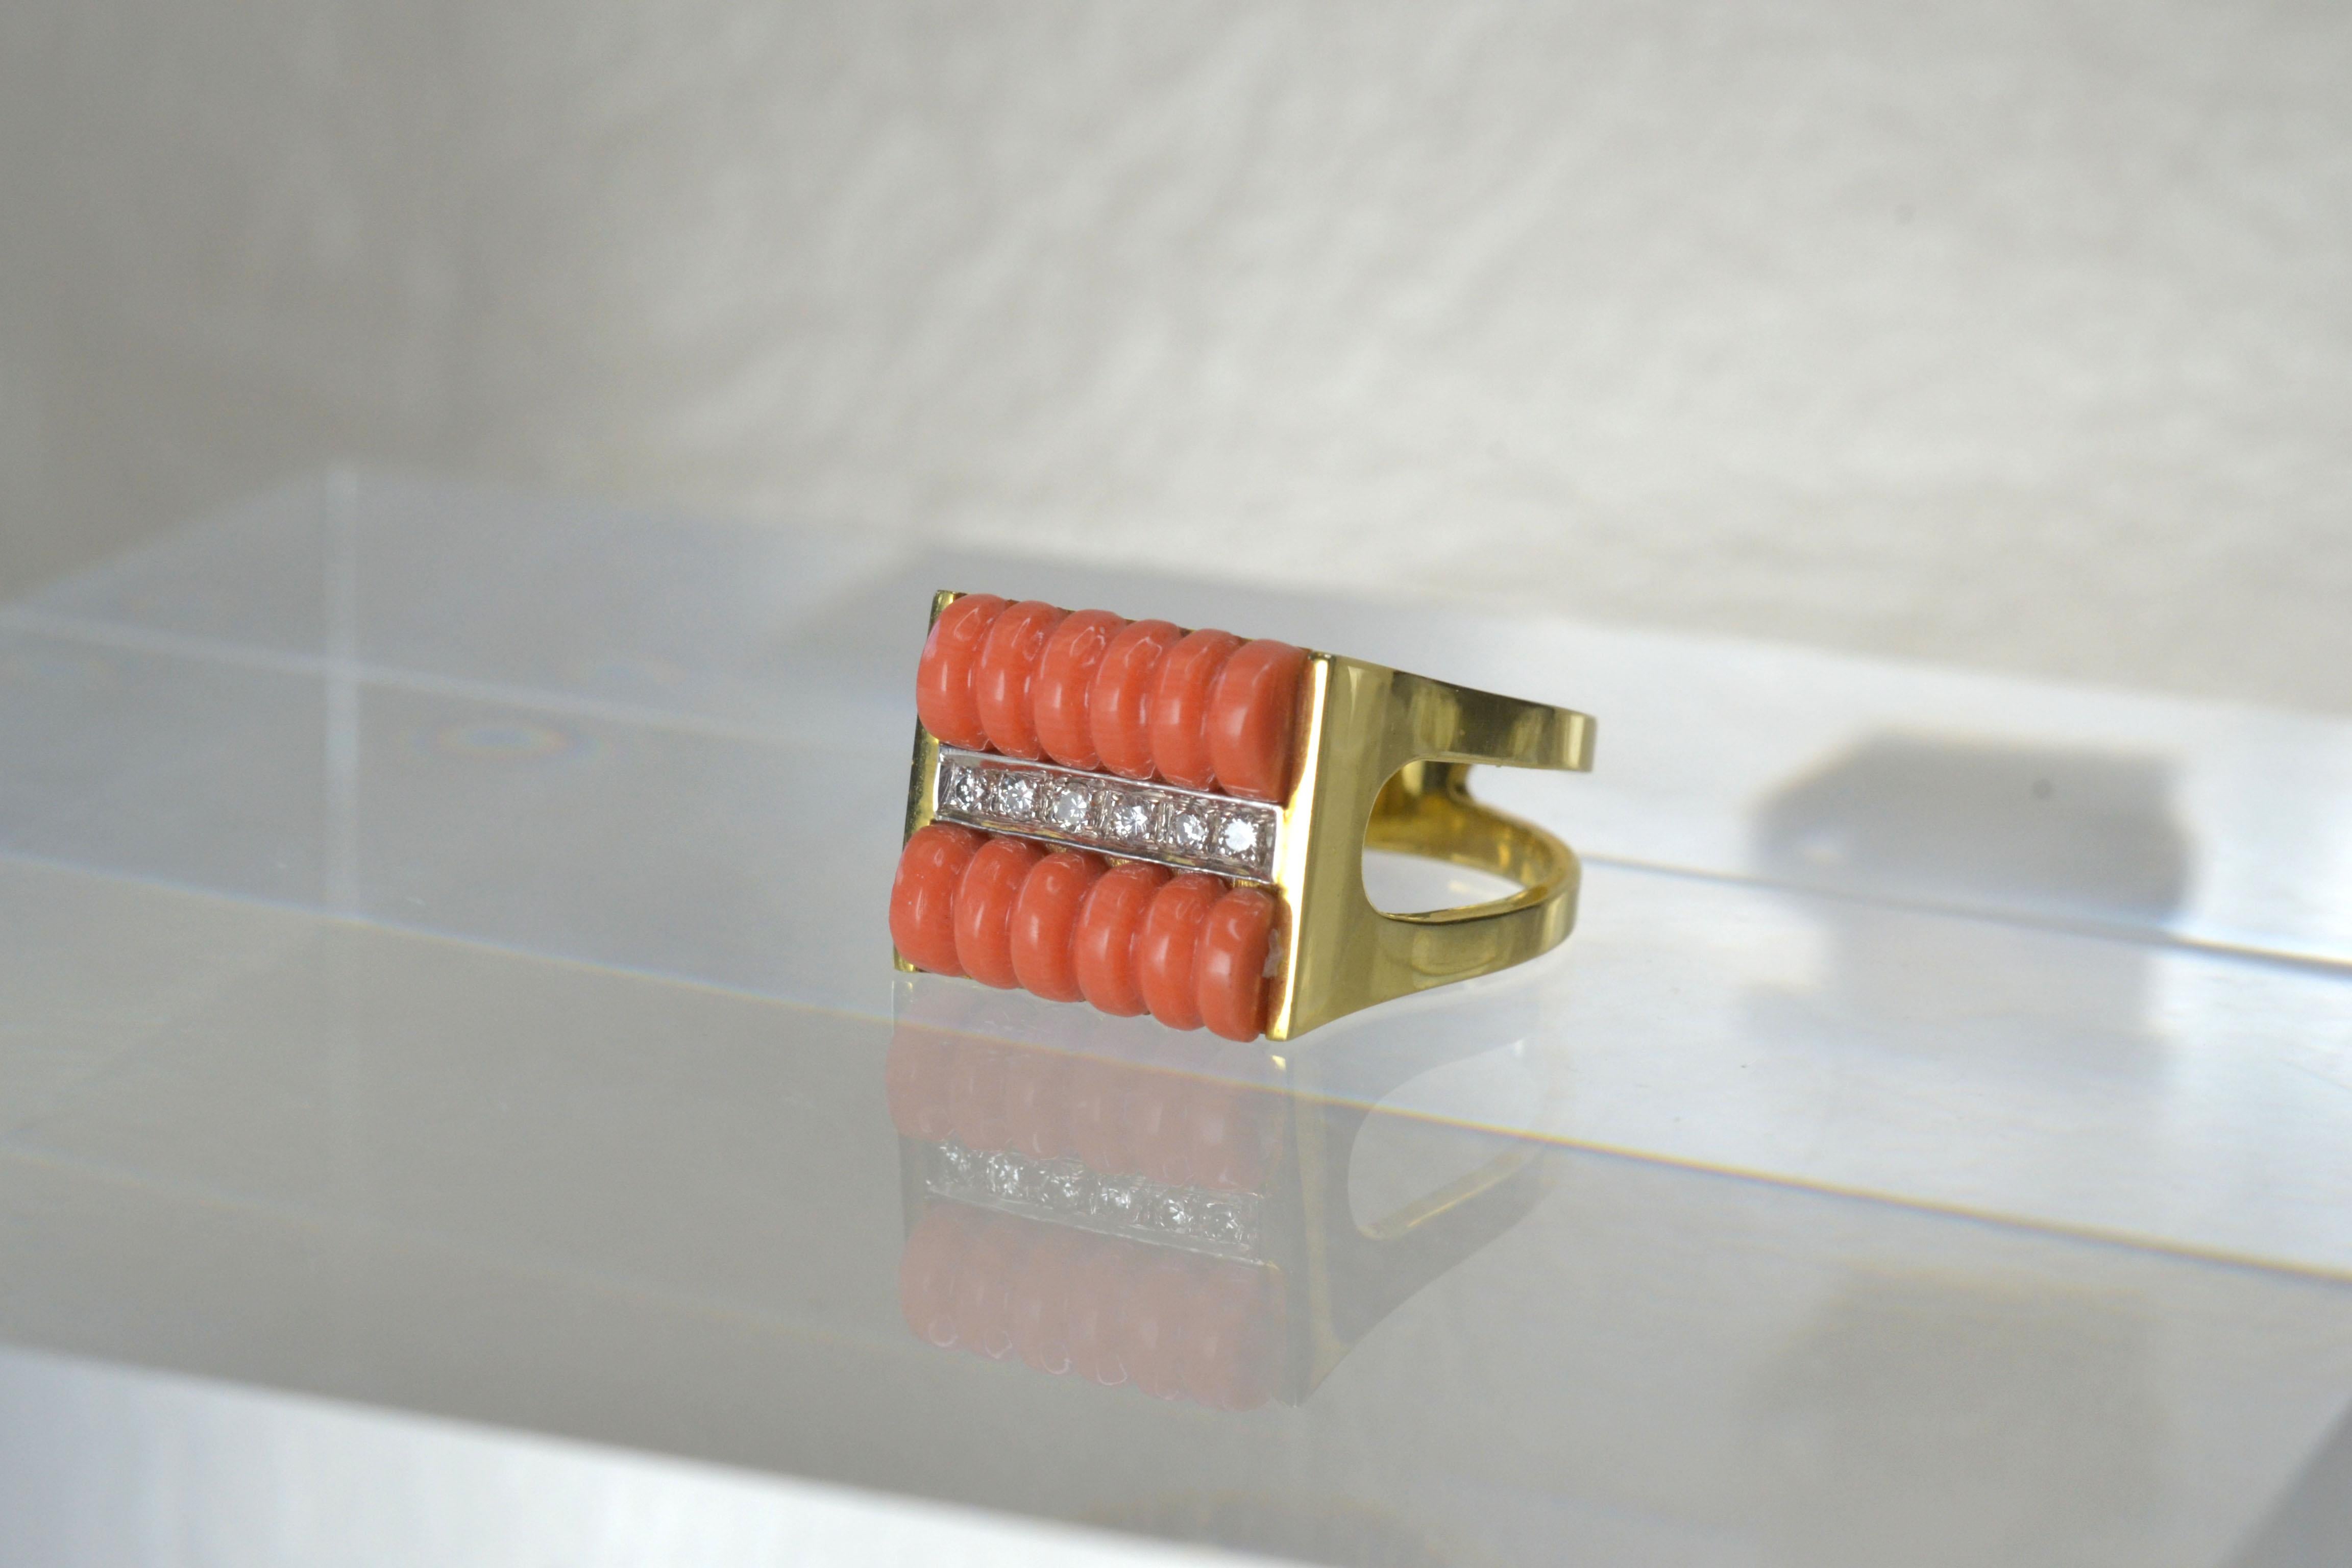 Vintage 14k Gold Coral & White Diamond Ring One-of-a-kind

This 14k gold ring from the 1980s makes for a wonderful statement piece. The coral and the diamond accents are dazzling and this ring perfectly fits a size M 1/2!

Vintage from the 1980s